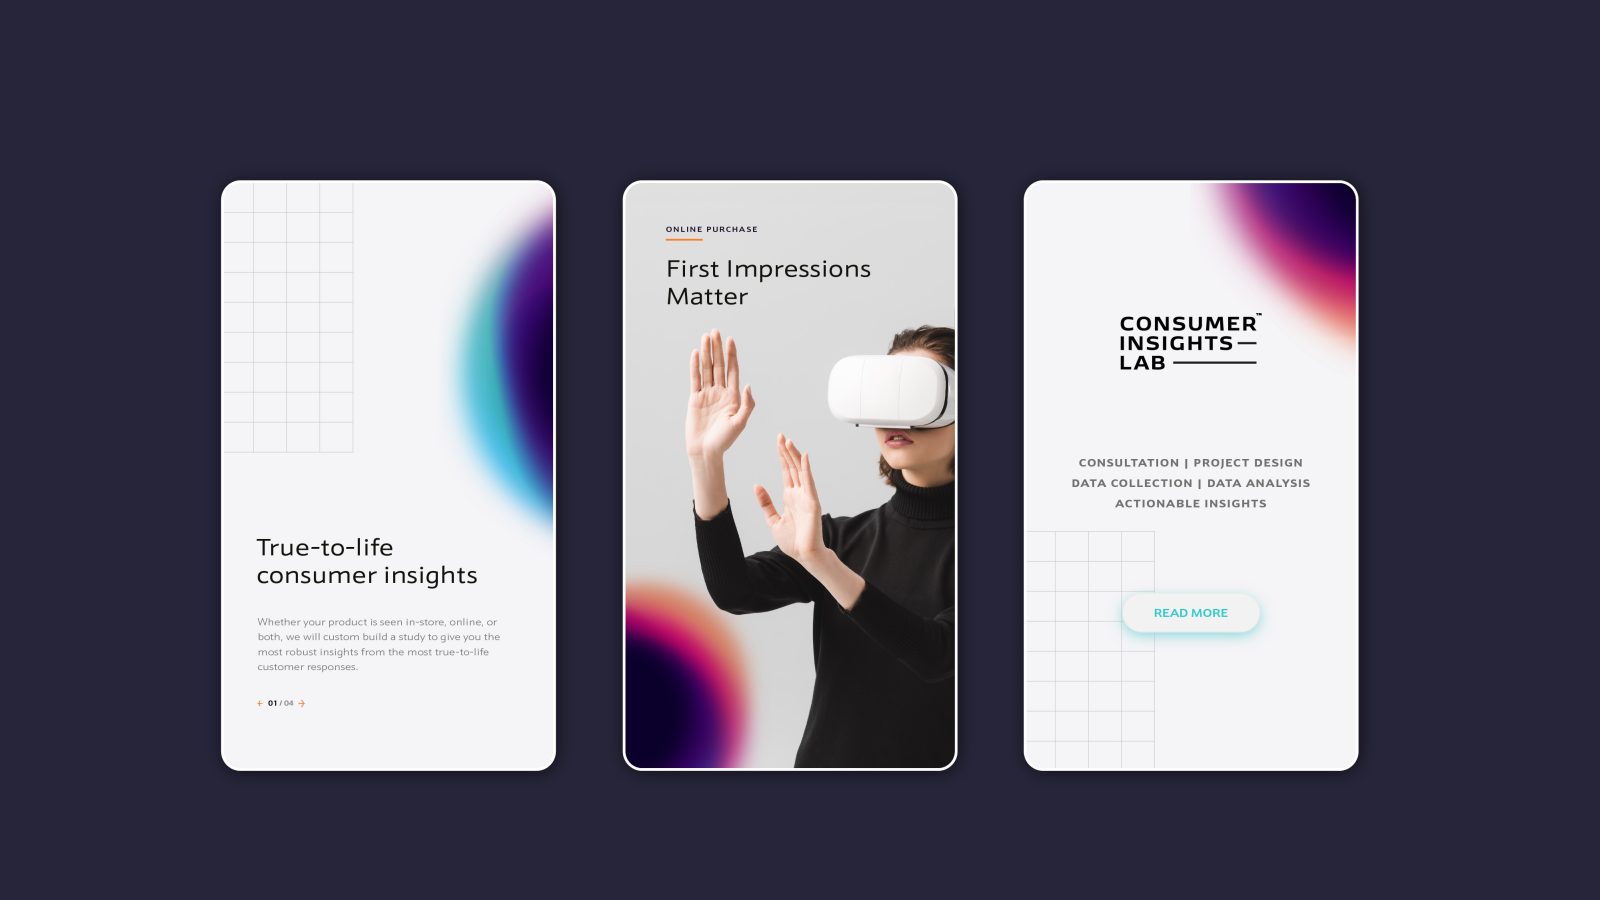 Three mobile app screens demonstrating a virtual reality app, featuring a woman using a VR headset on the central screen, and text about consumer insights and data analysis for brand agencies in the UK on the others.